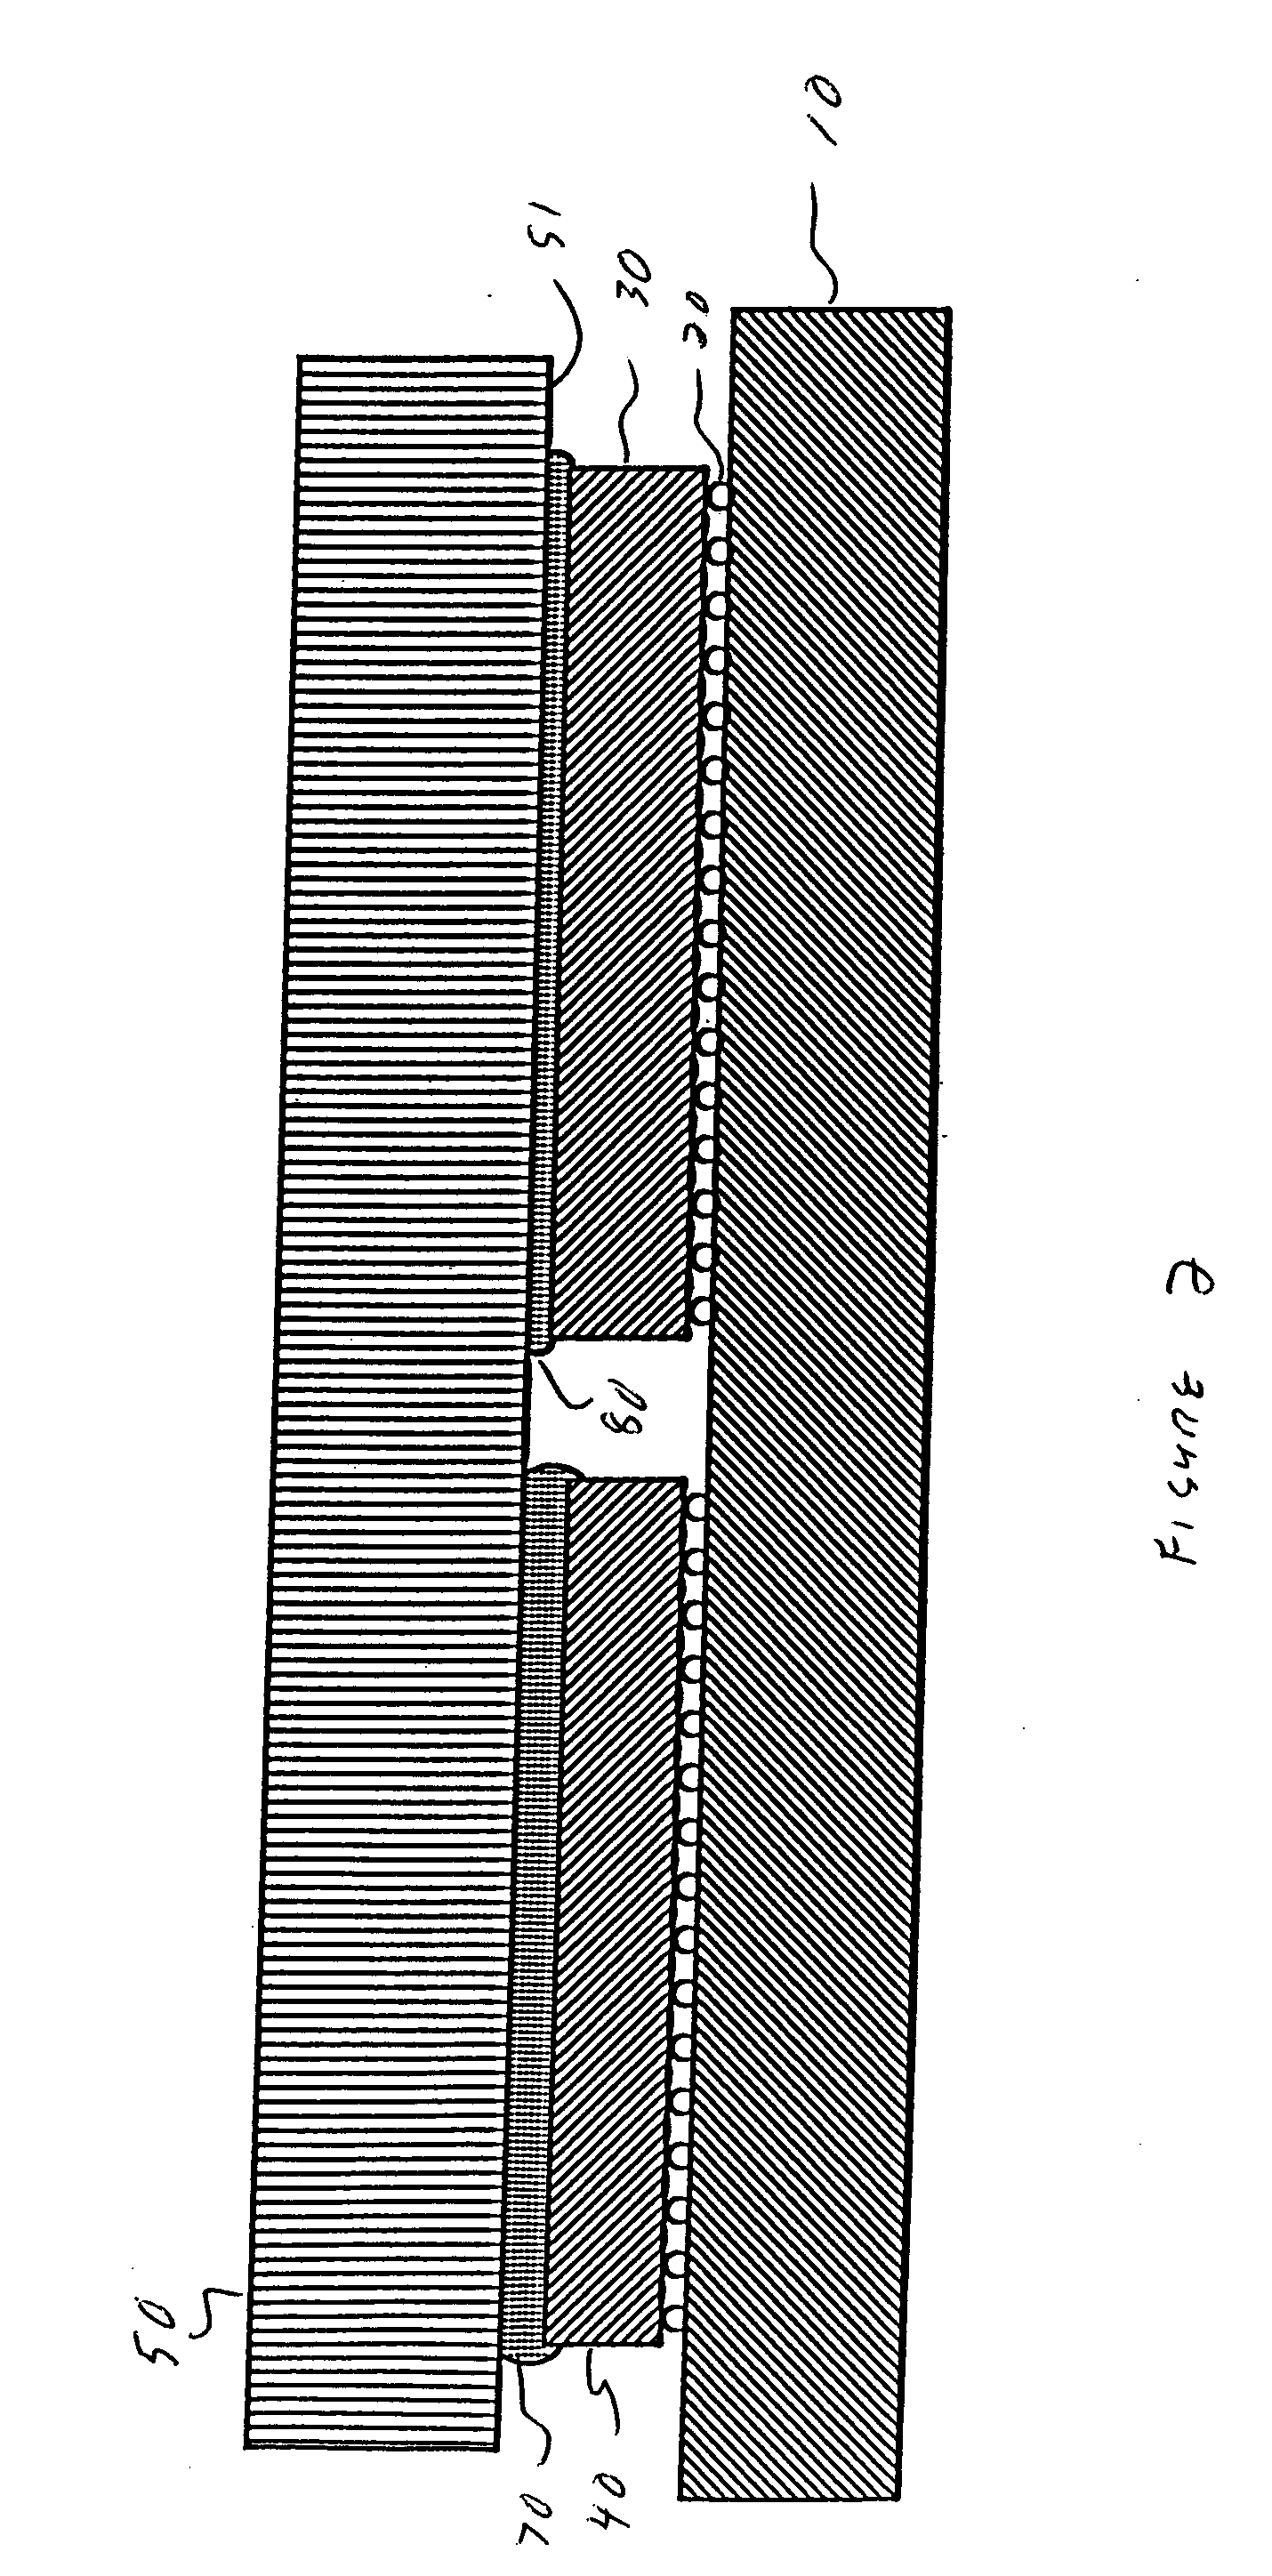 Multiple power density chip structure